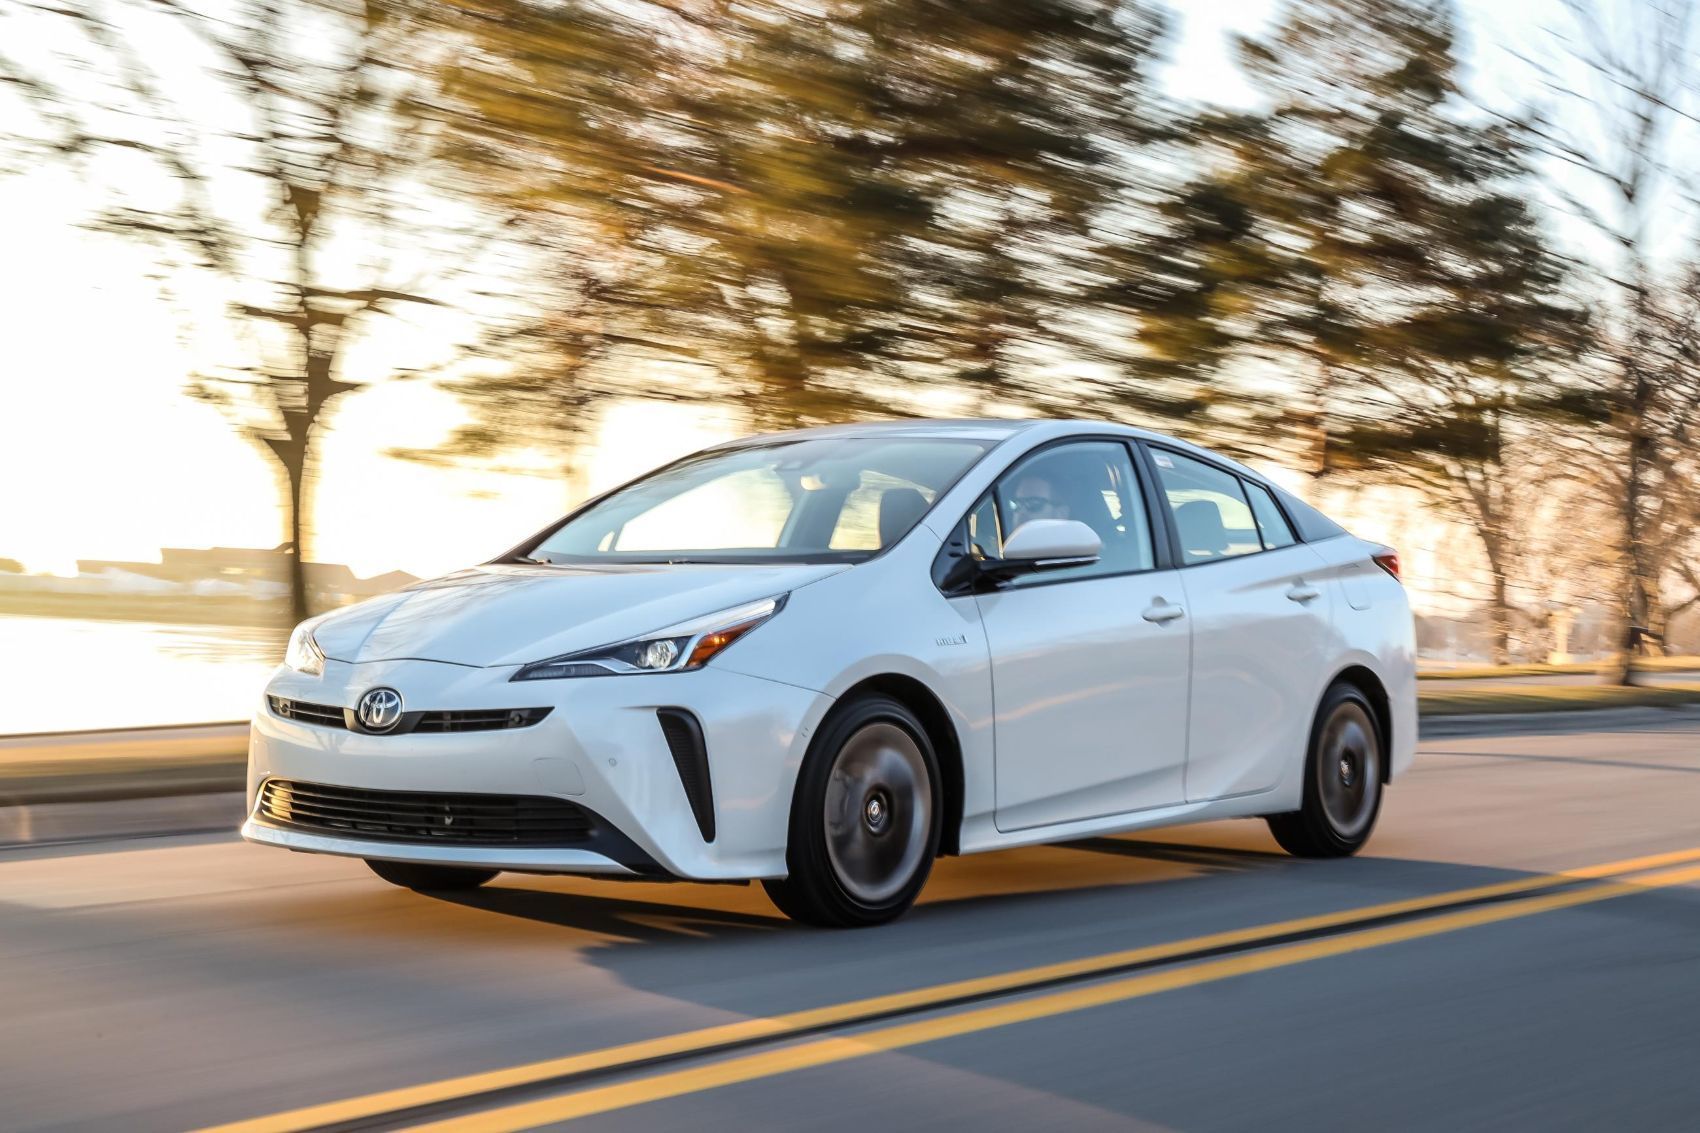 2020 Toyota Prius: Still Efficient After All These Years